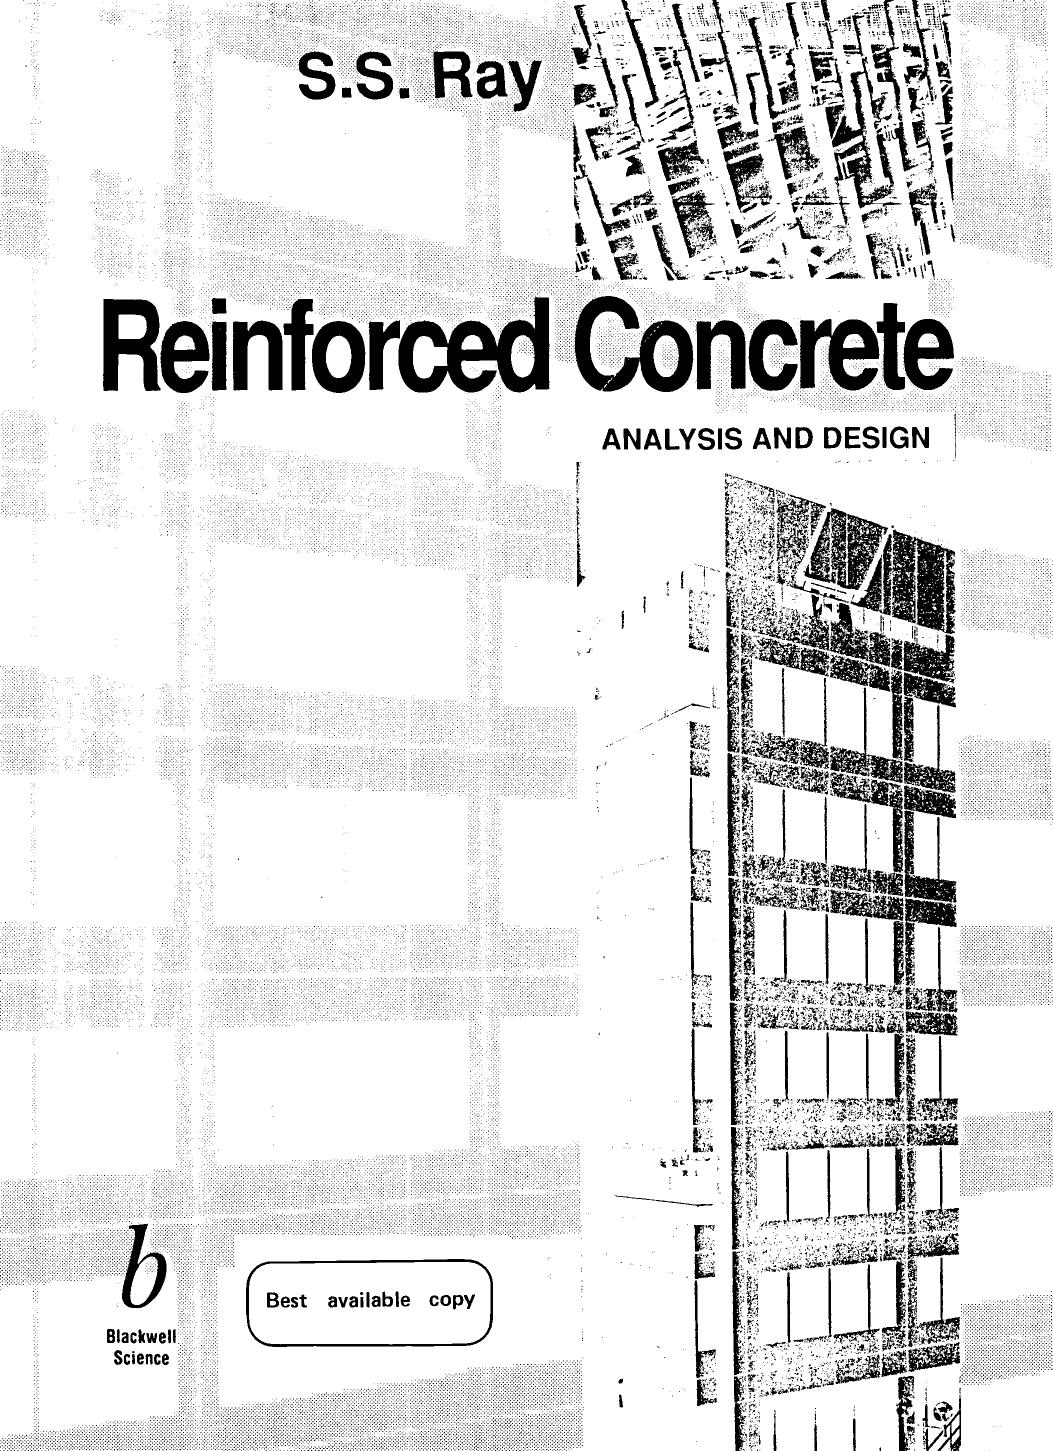 Reinforced Concrete Analysis and Design 1995